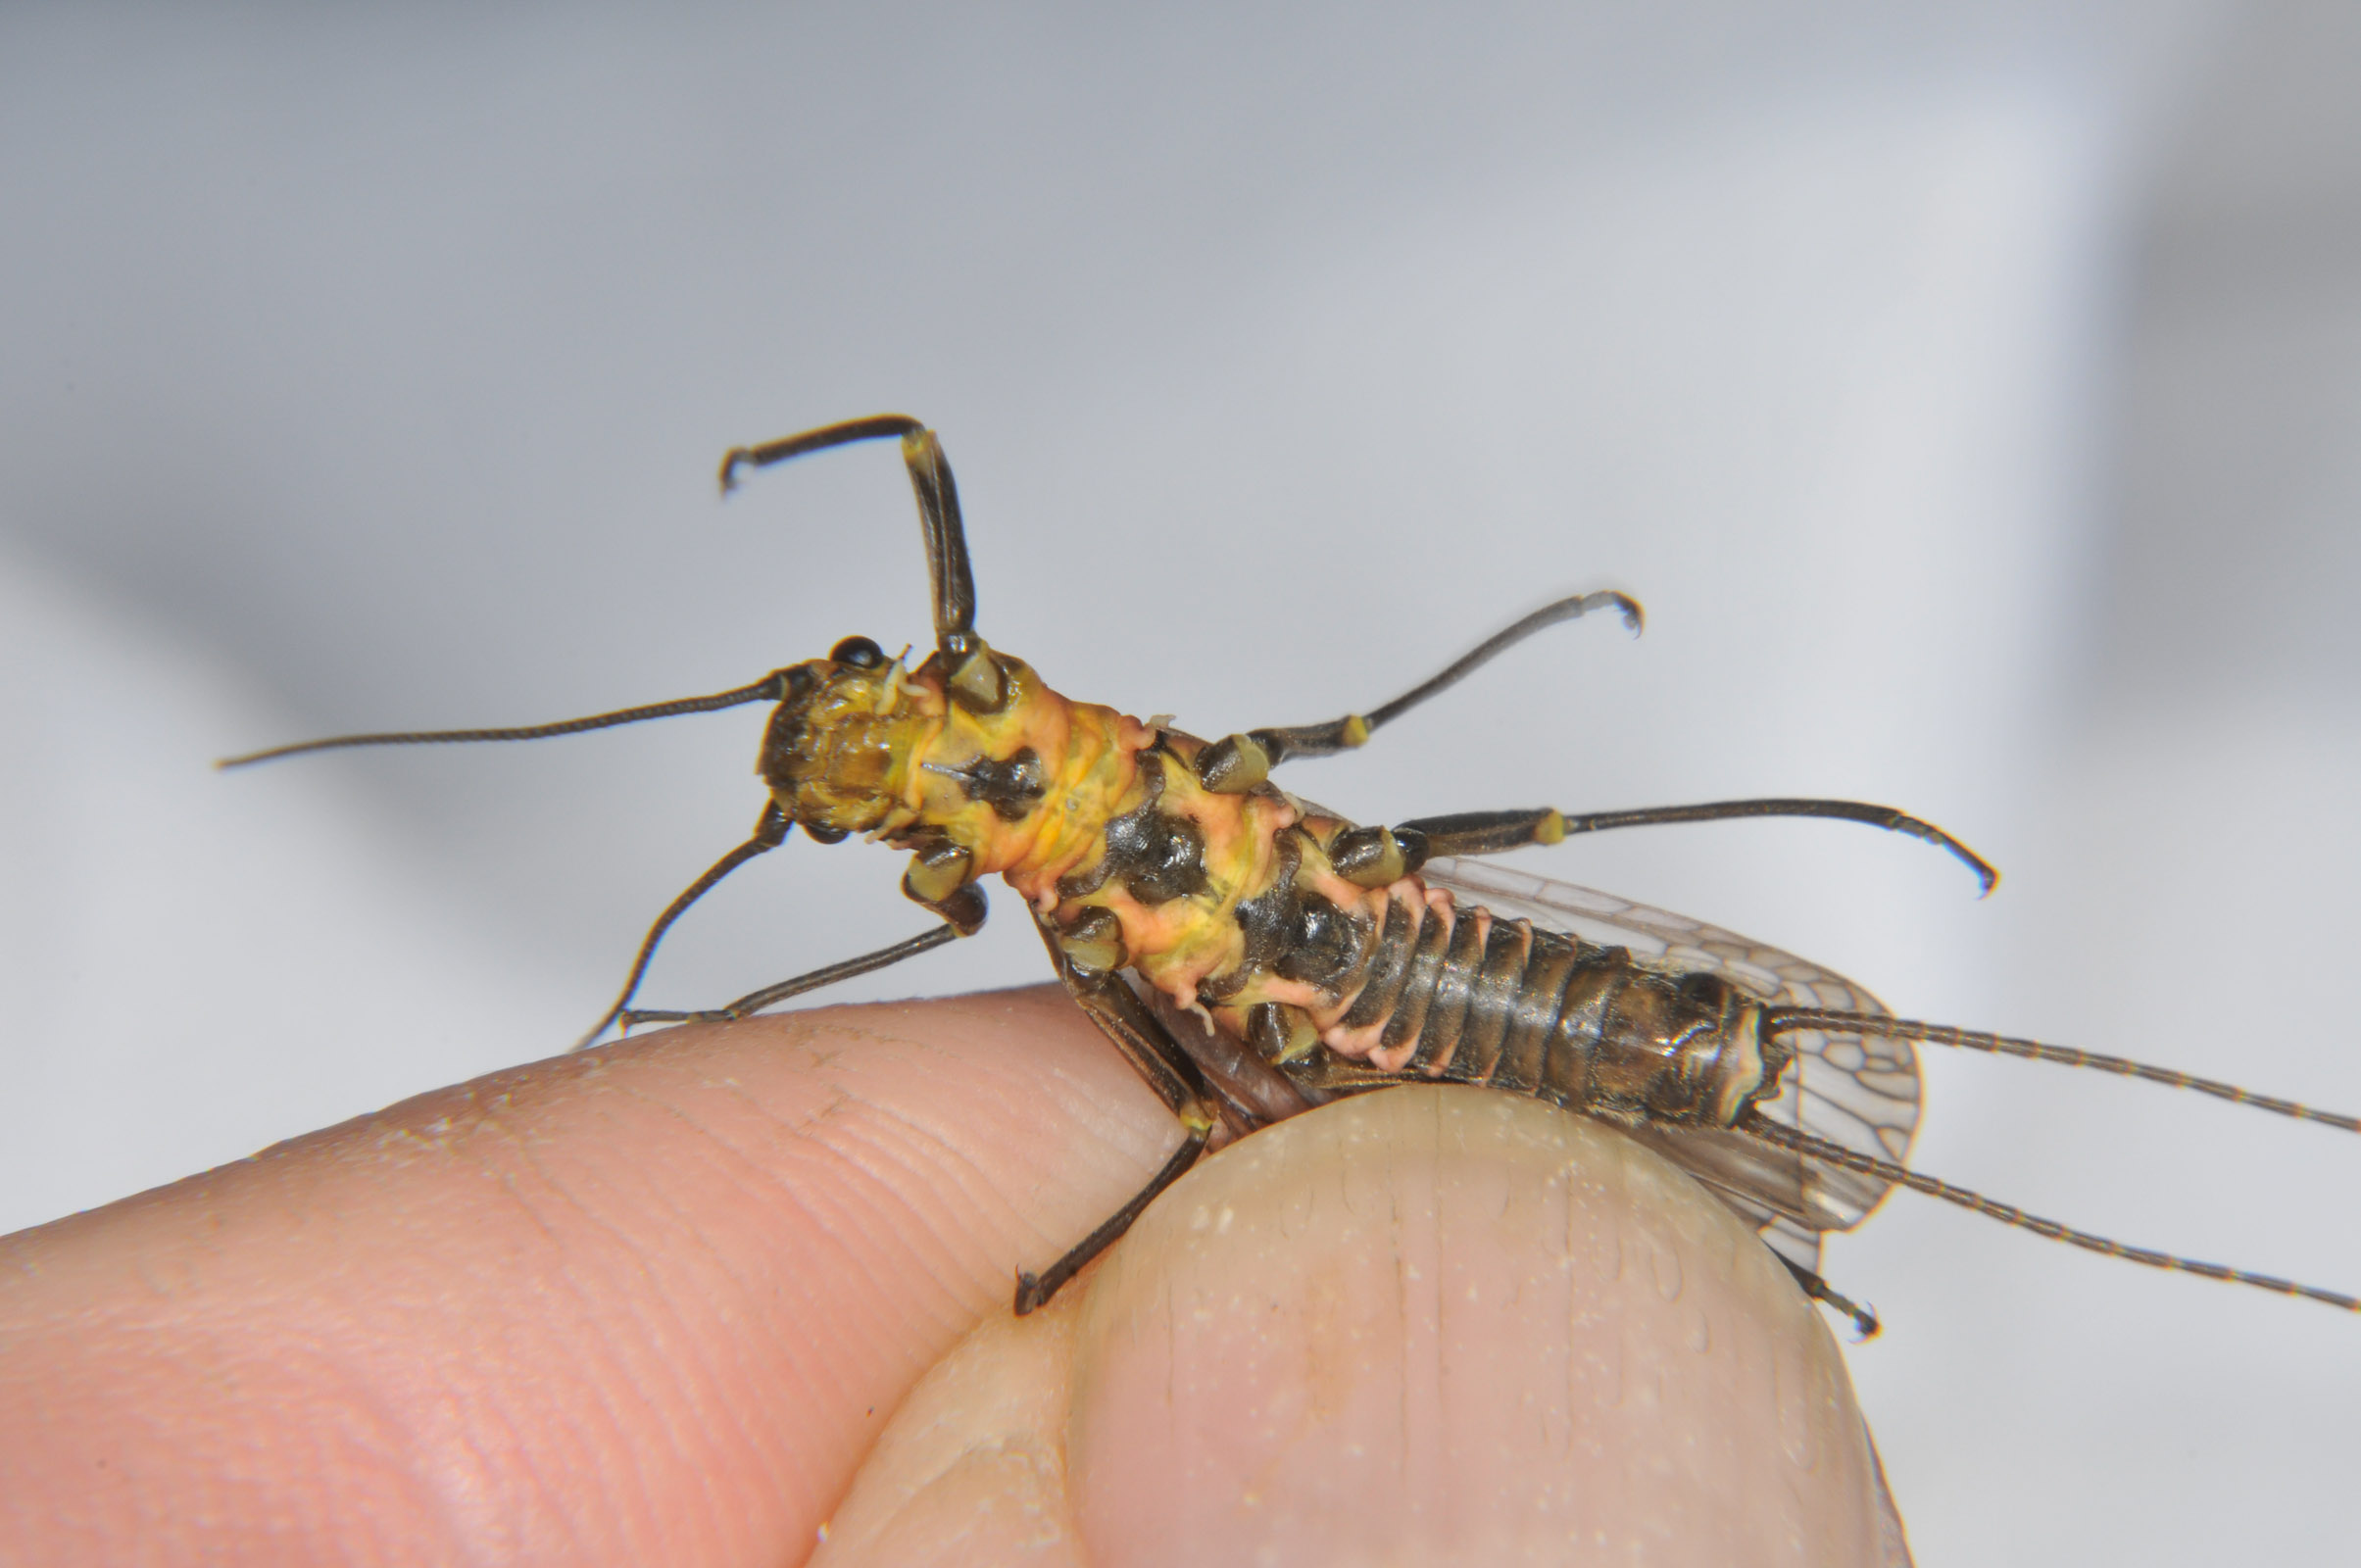 Female Perlinodes aurea (Springfly) Stonefly Adult from the  Touchet River in Washington